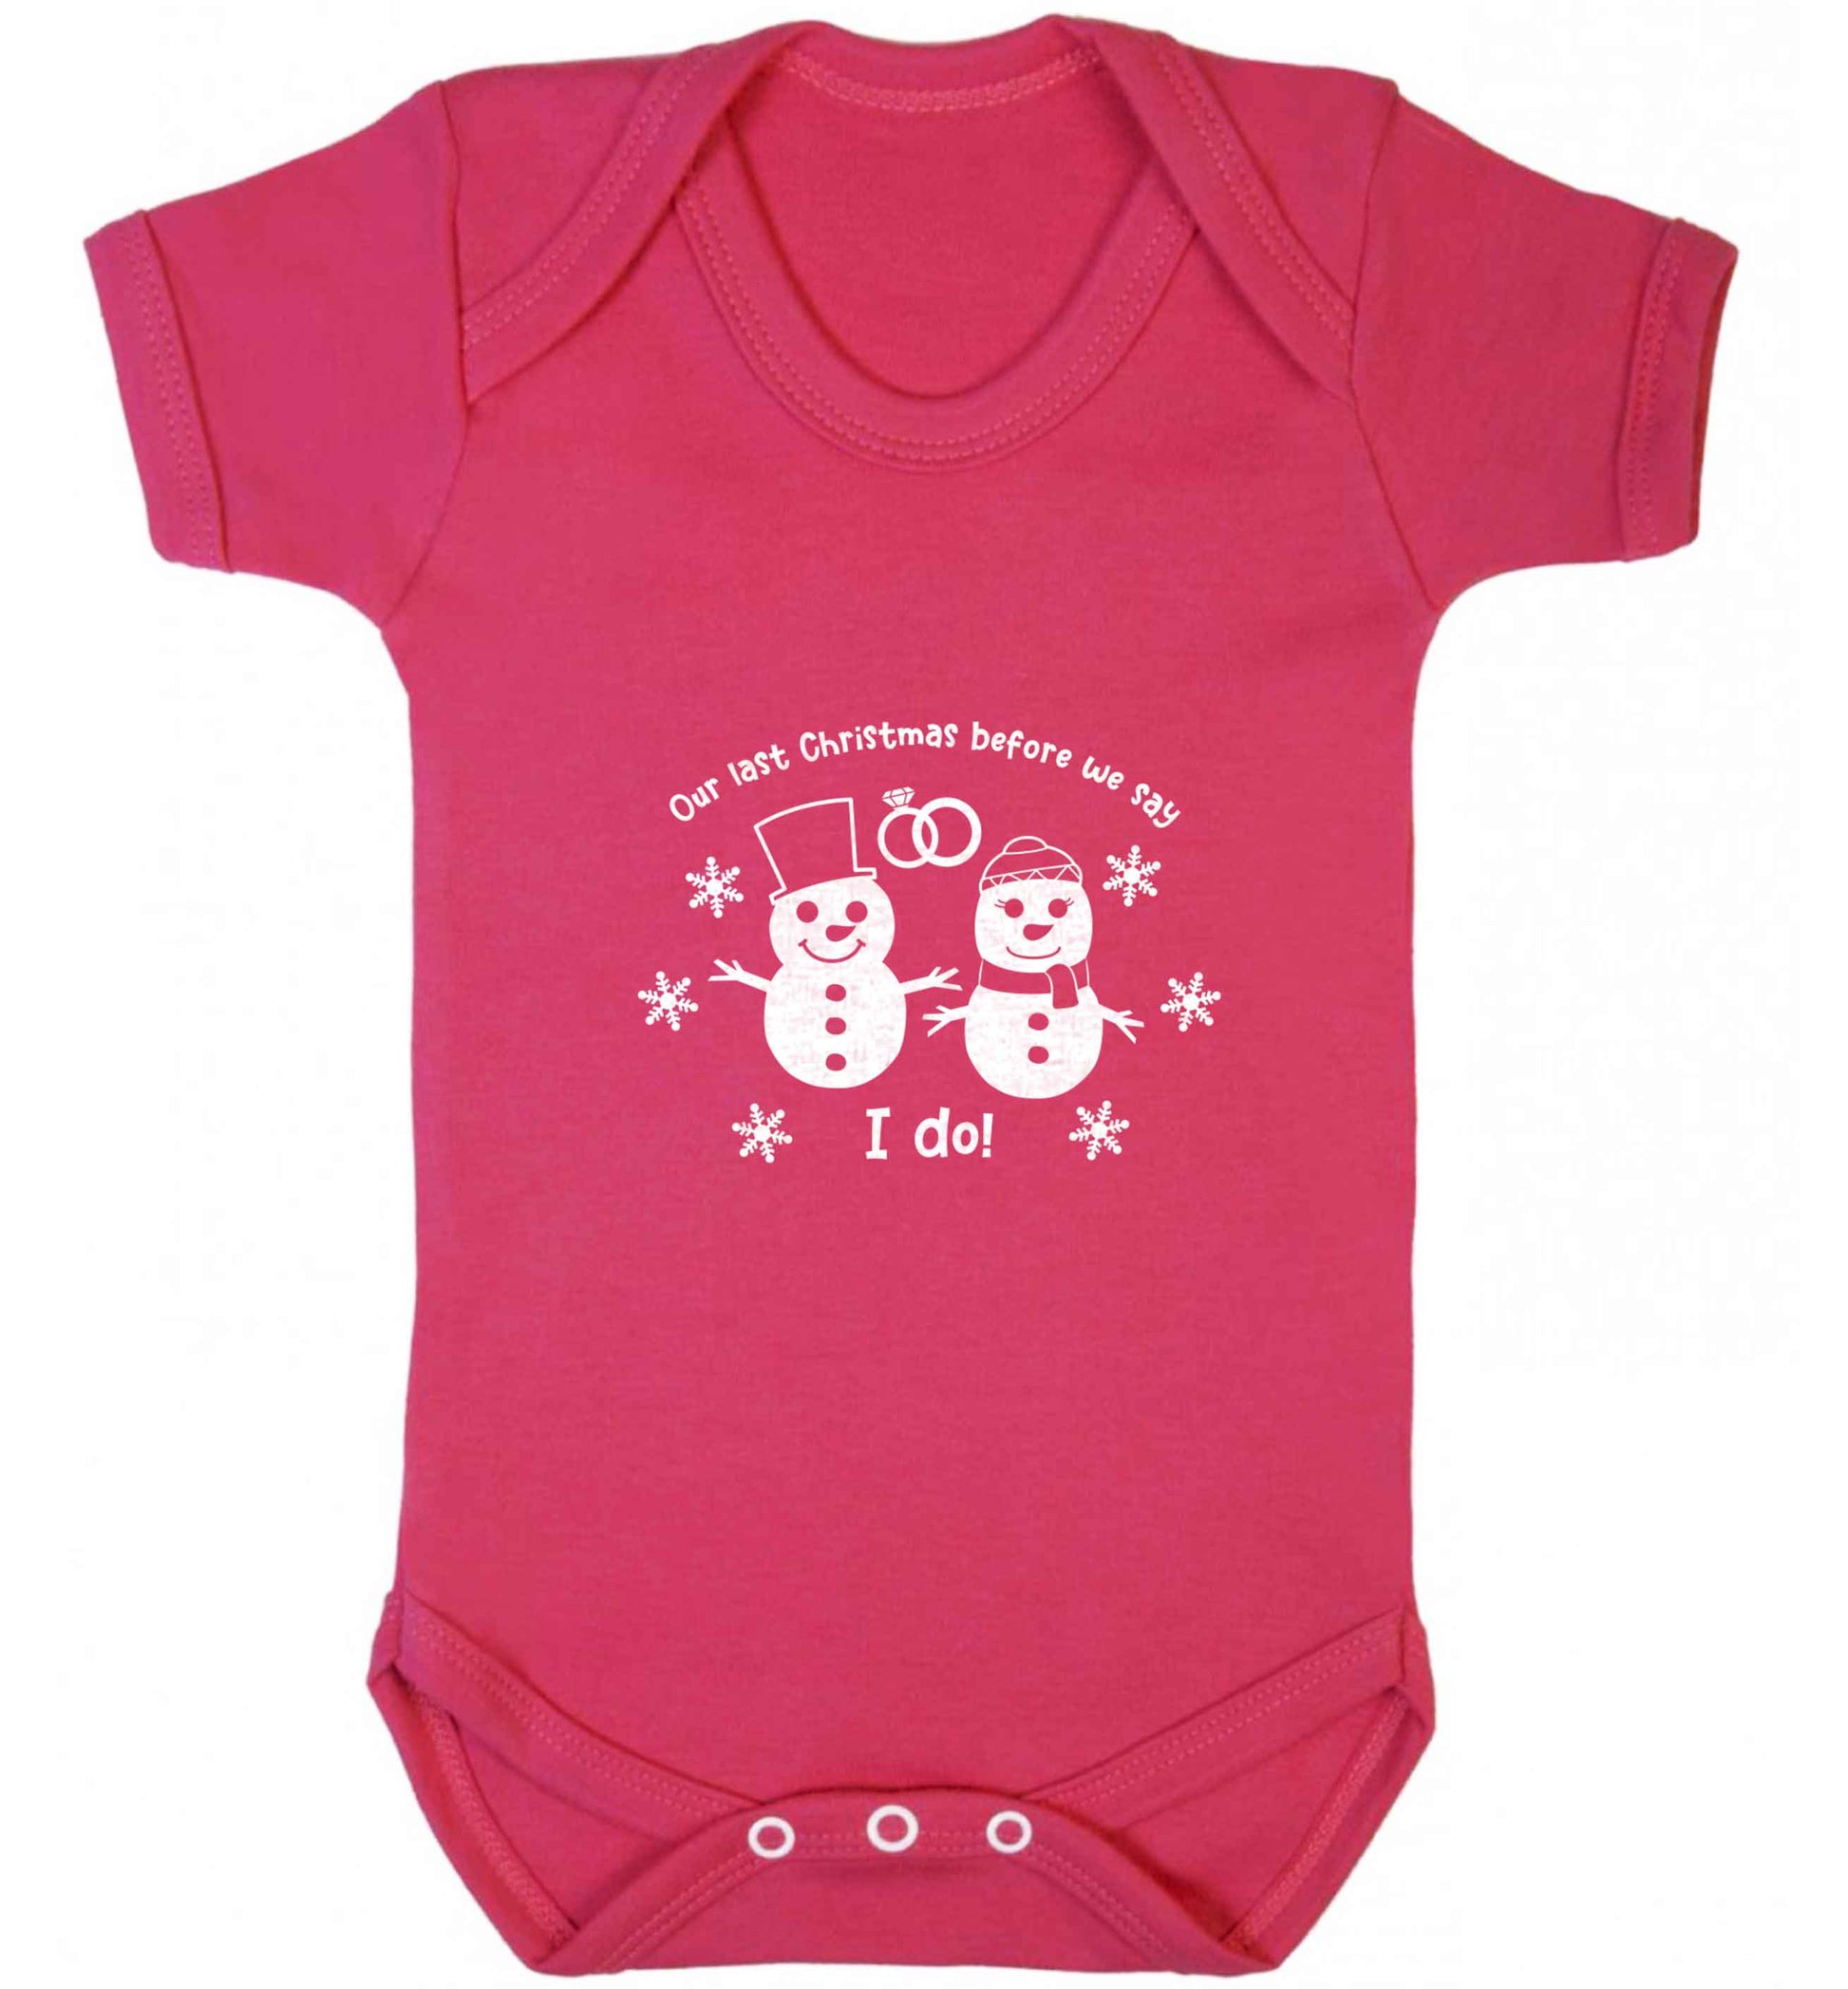 Last Christmas before we say I do baby vest dark pink 18-24 months